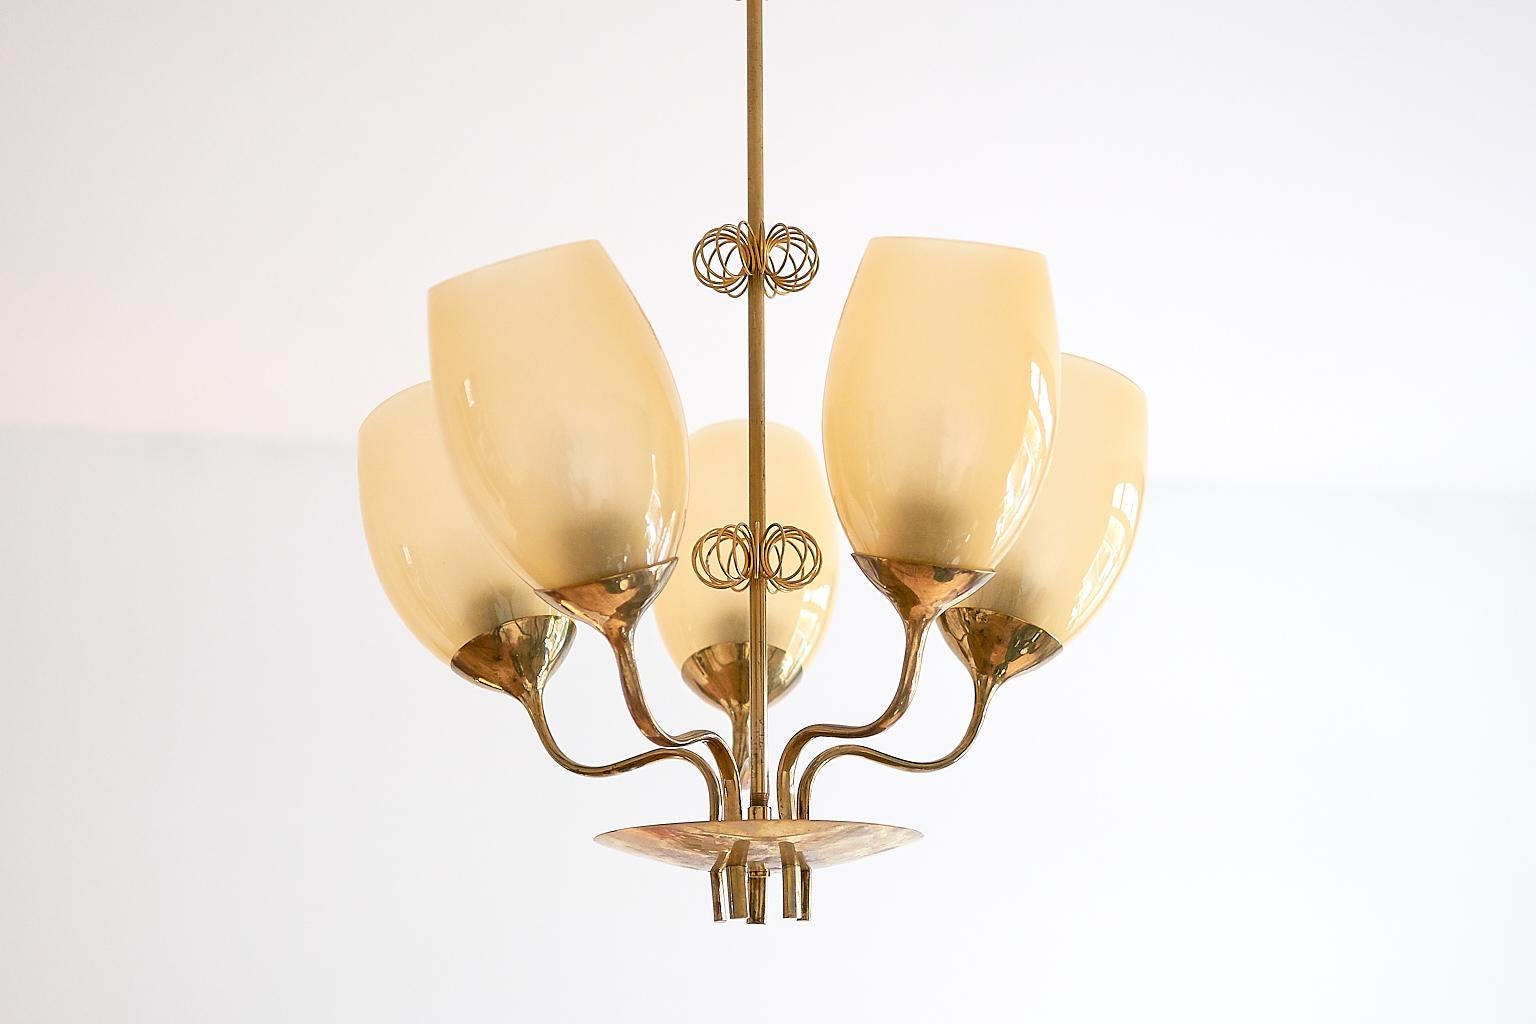 This five-glass chandelier was designed by Paavo Tynell and produced by Taito Oy in Finland in 1949. Paavo Tynell was responsible for designing the lighting for the hospital in Kuopio, which can be viewed in the sketches from the Taito archives (as